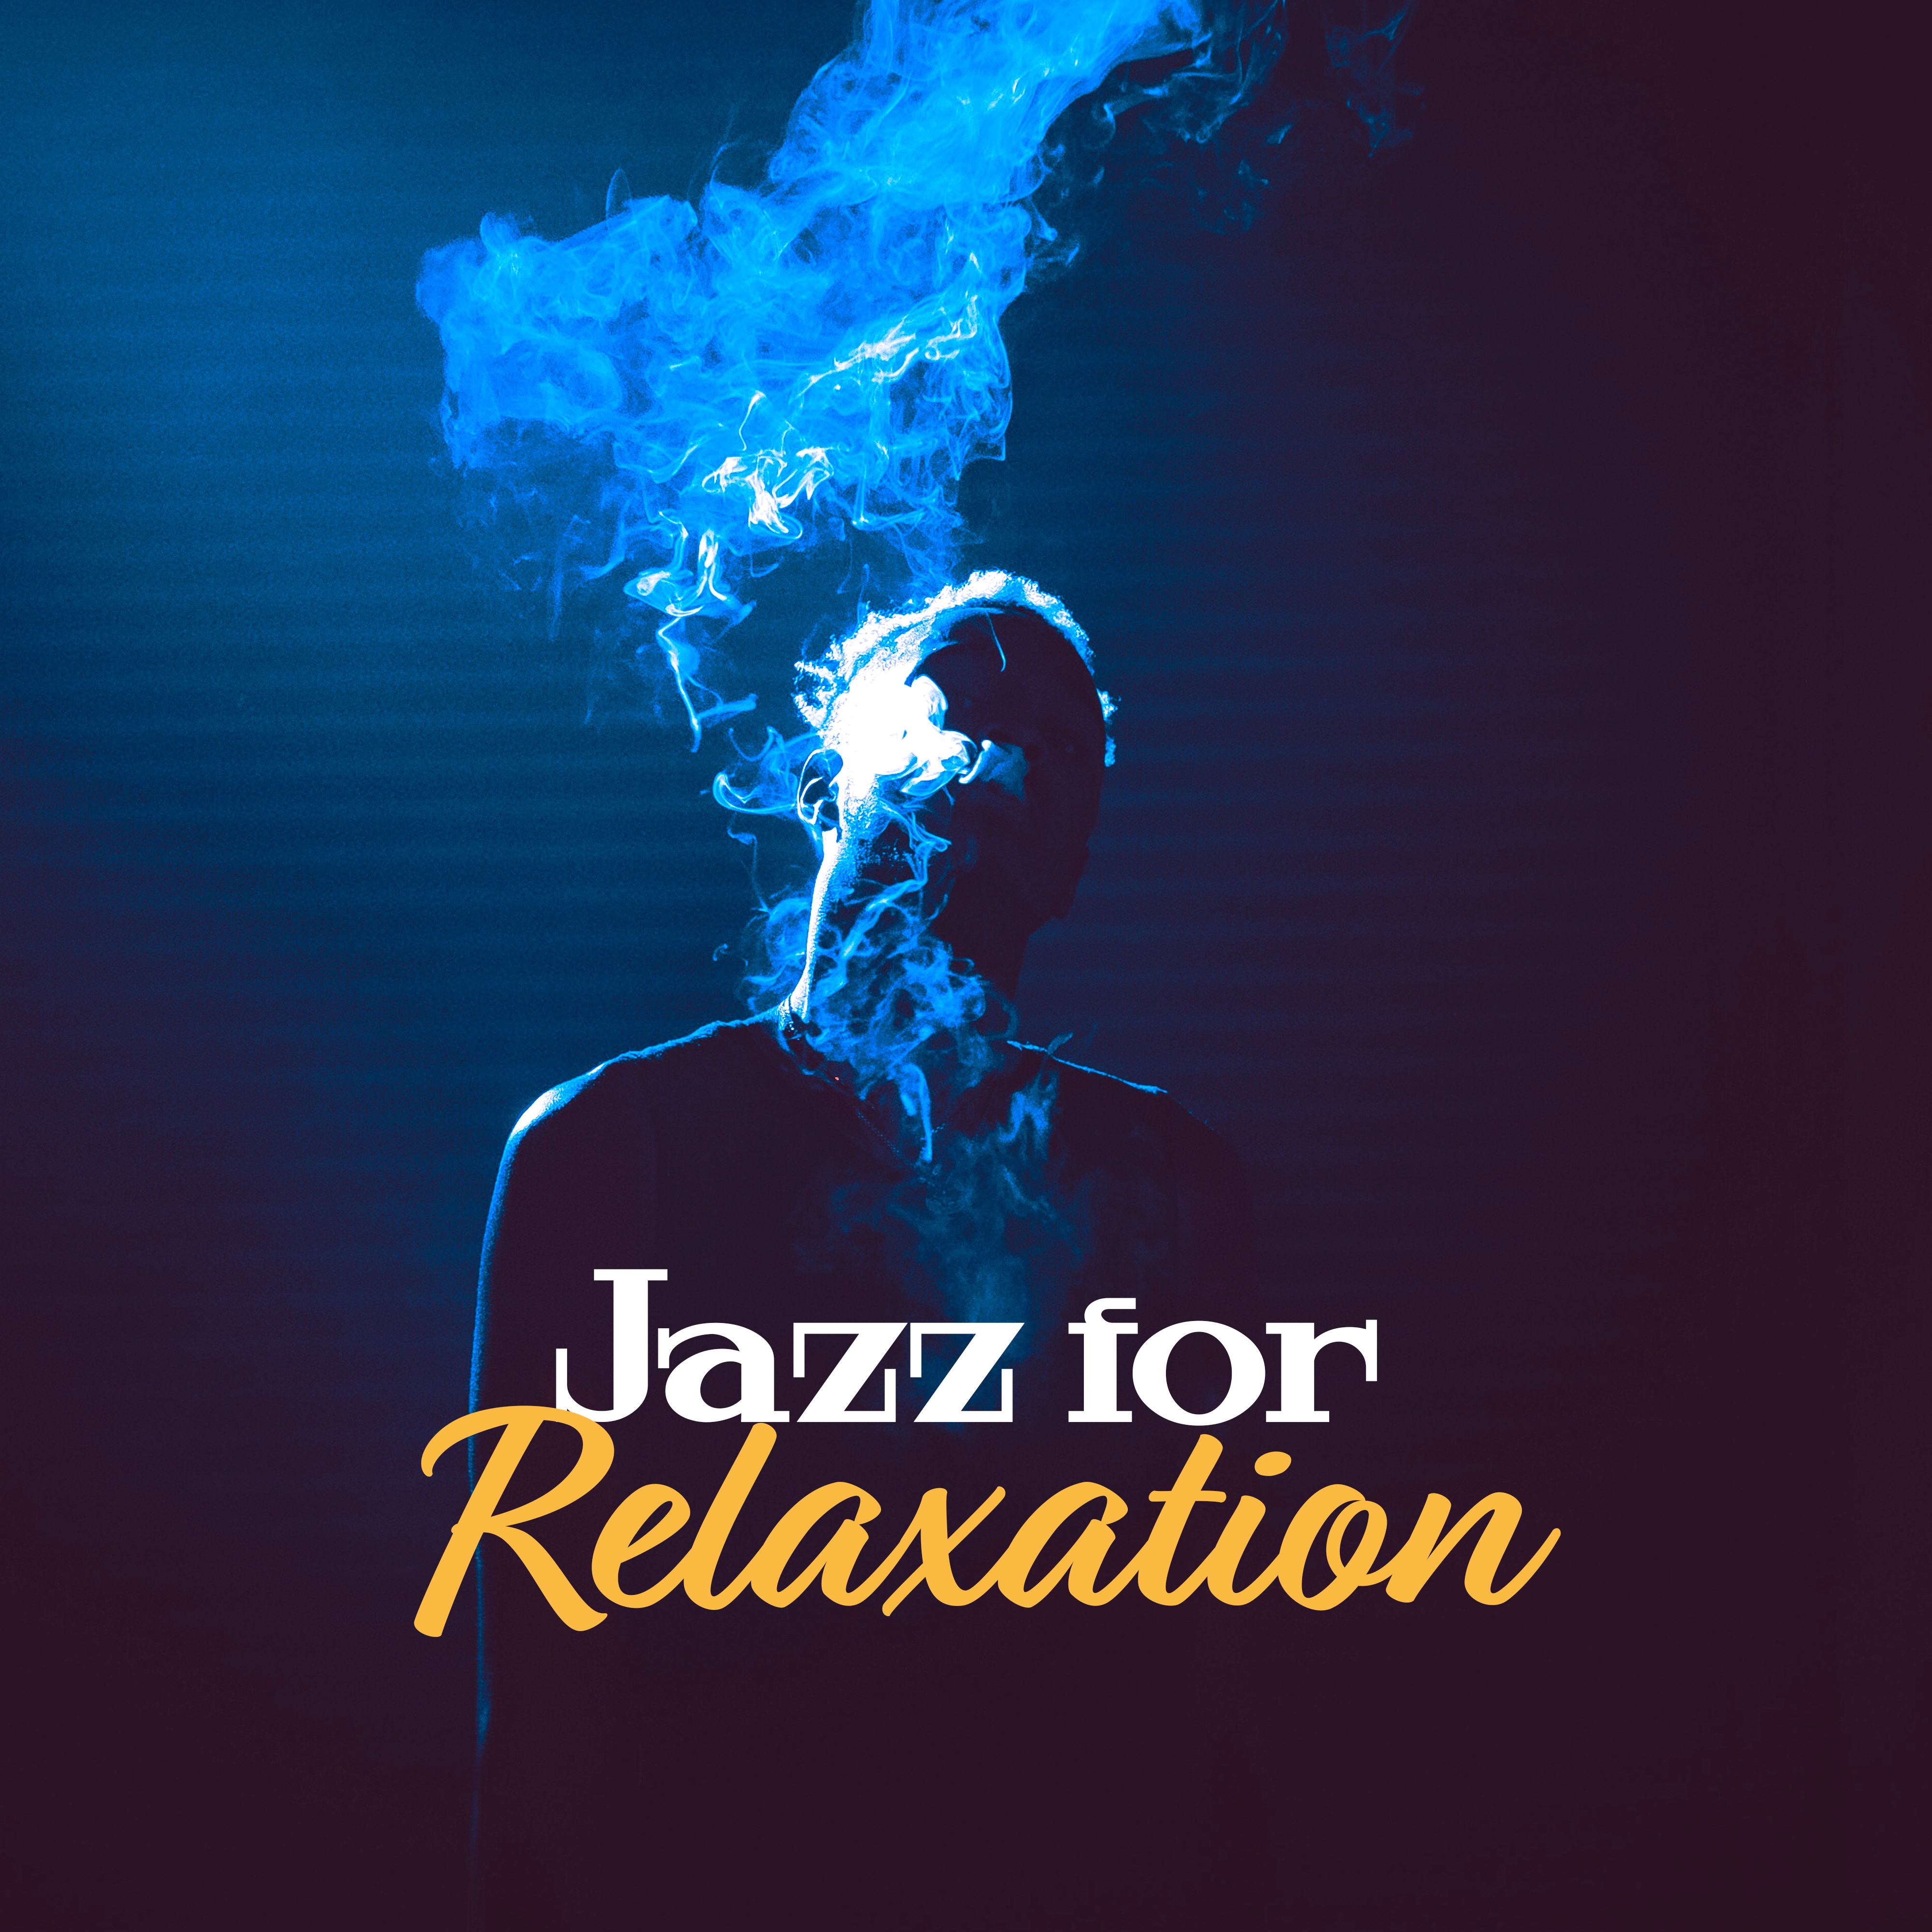 Jazz for Relaxation